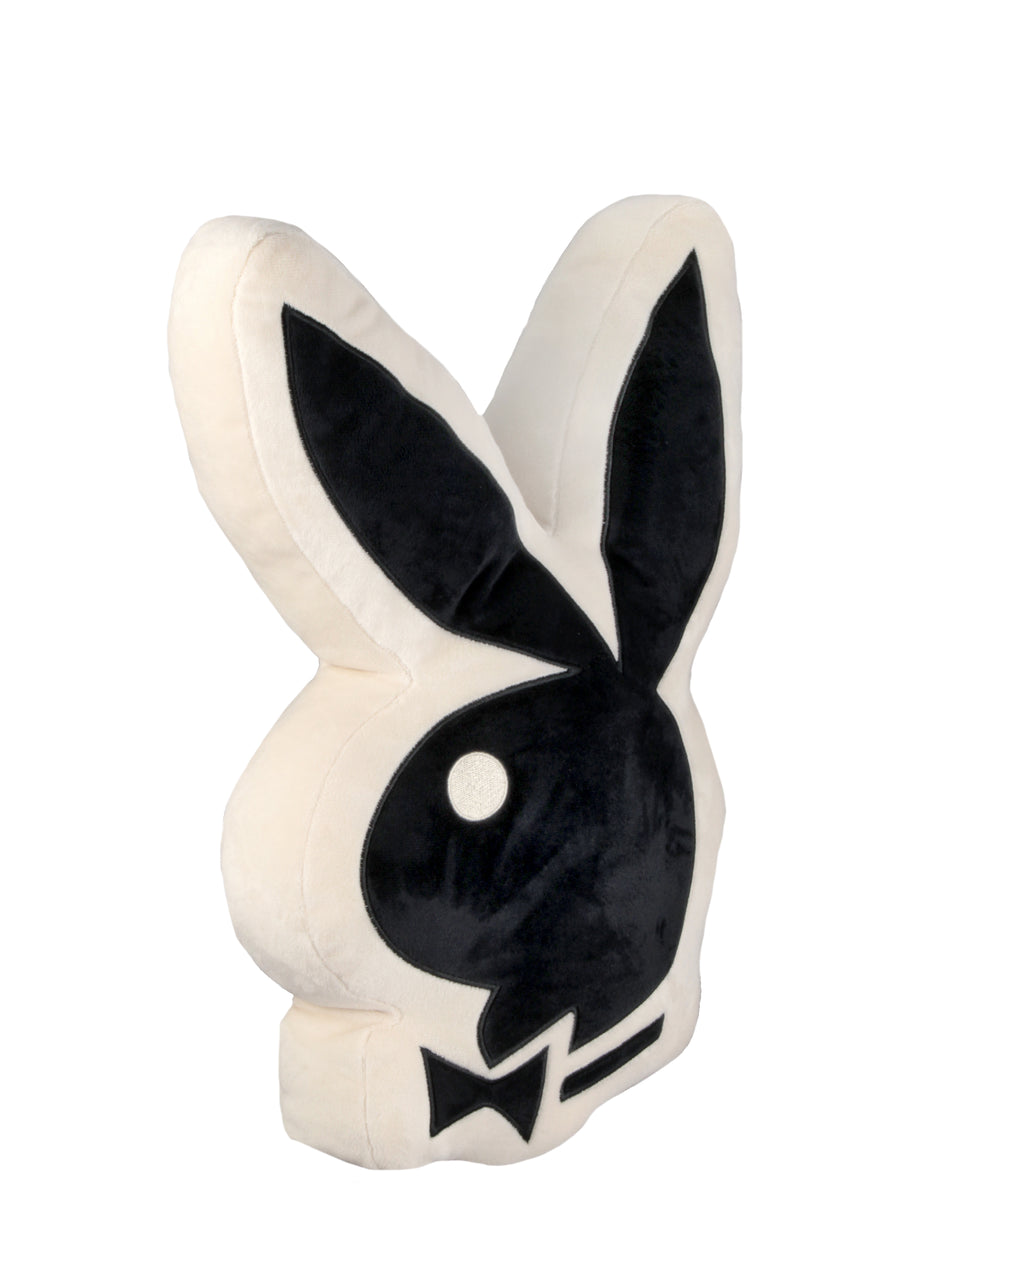 Playboy Plush Shaped Accent Pillow